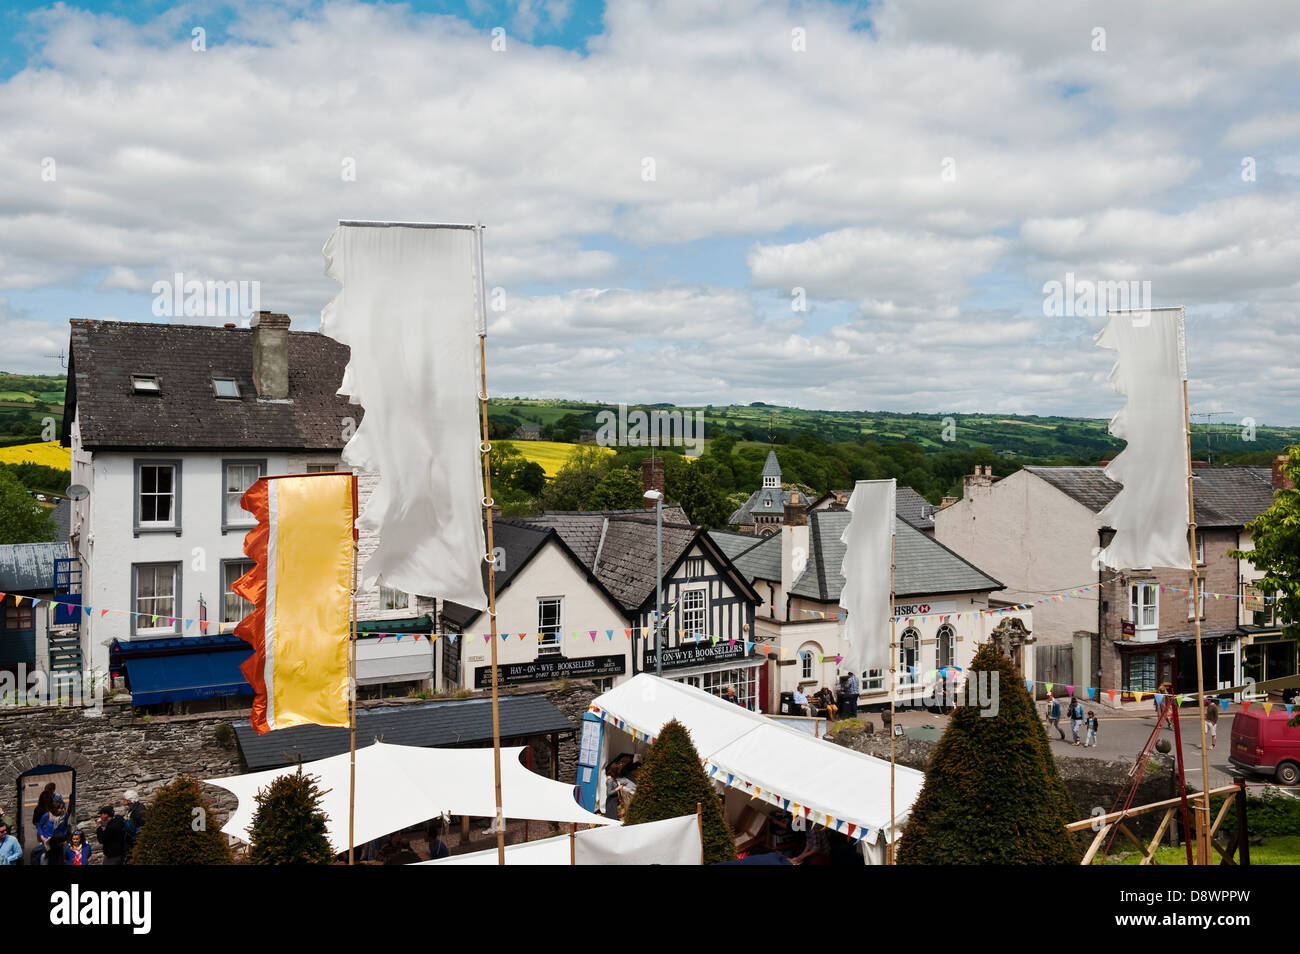 The centre of Hay-on-Wye, UK, the town famous for its bookshops and literary festival, on the border between England and Wales Stock Photo